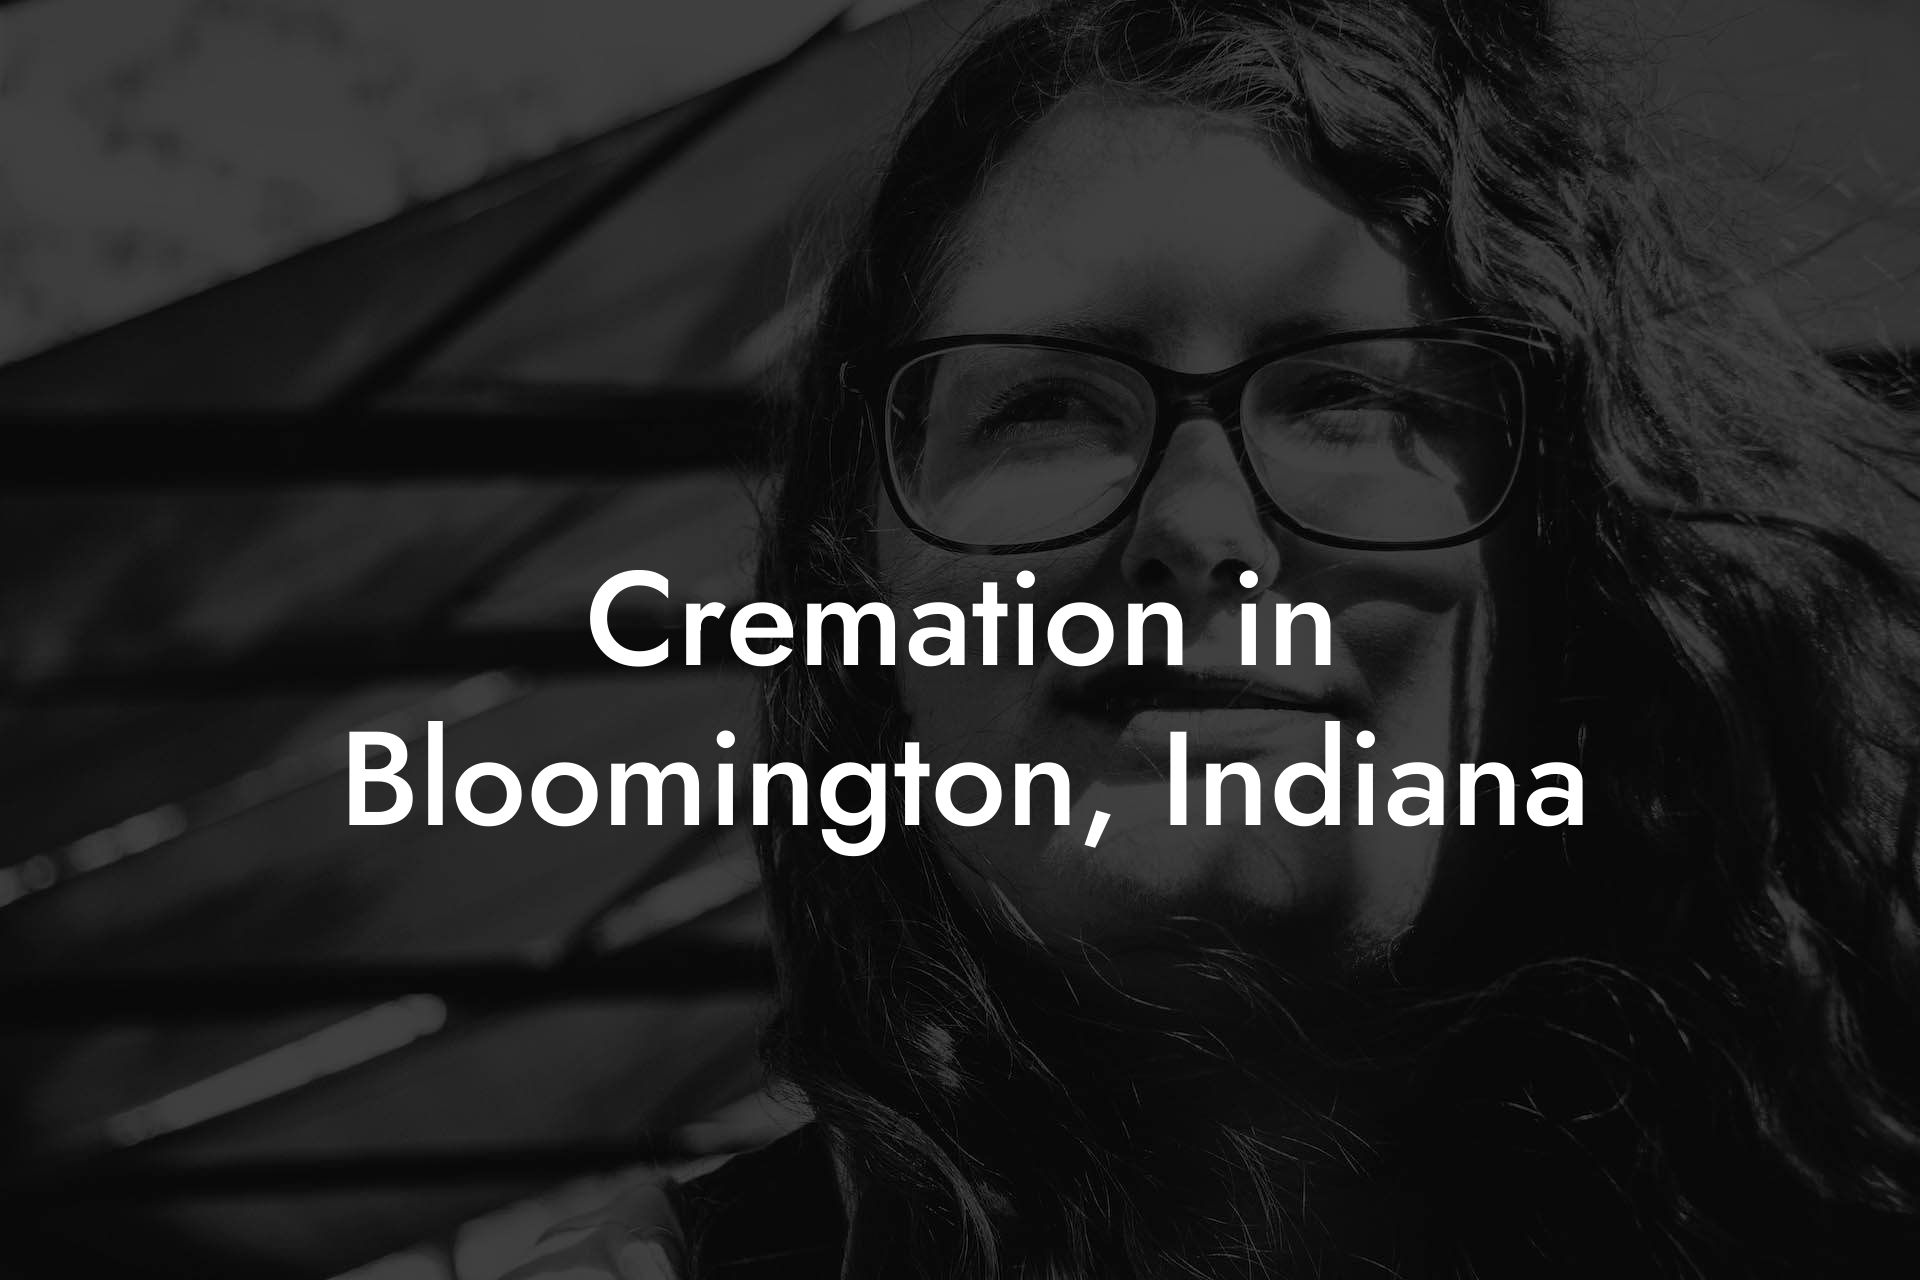 Cremation in Bloomington, Indiana